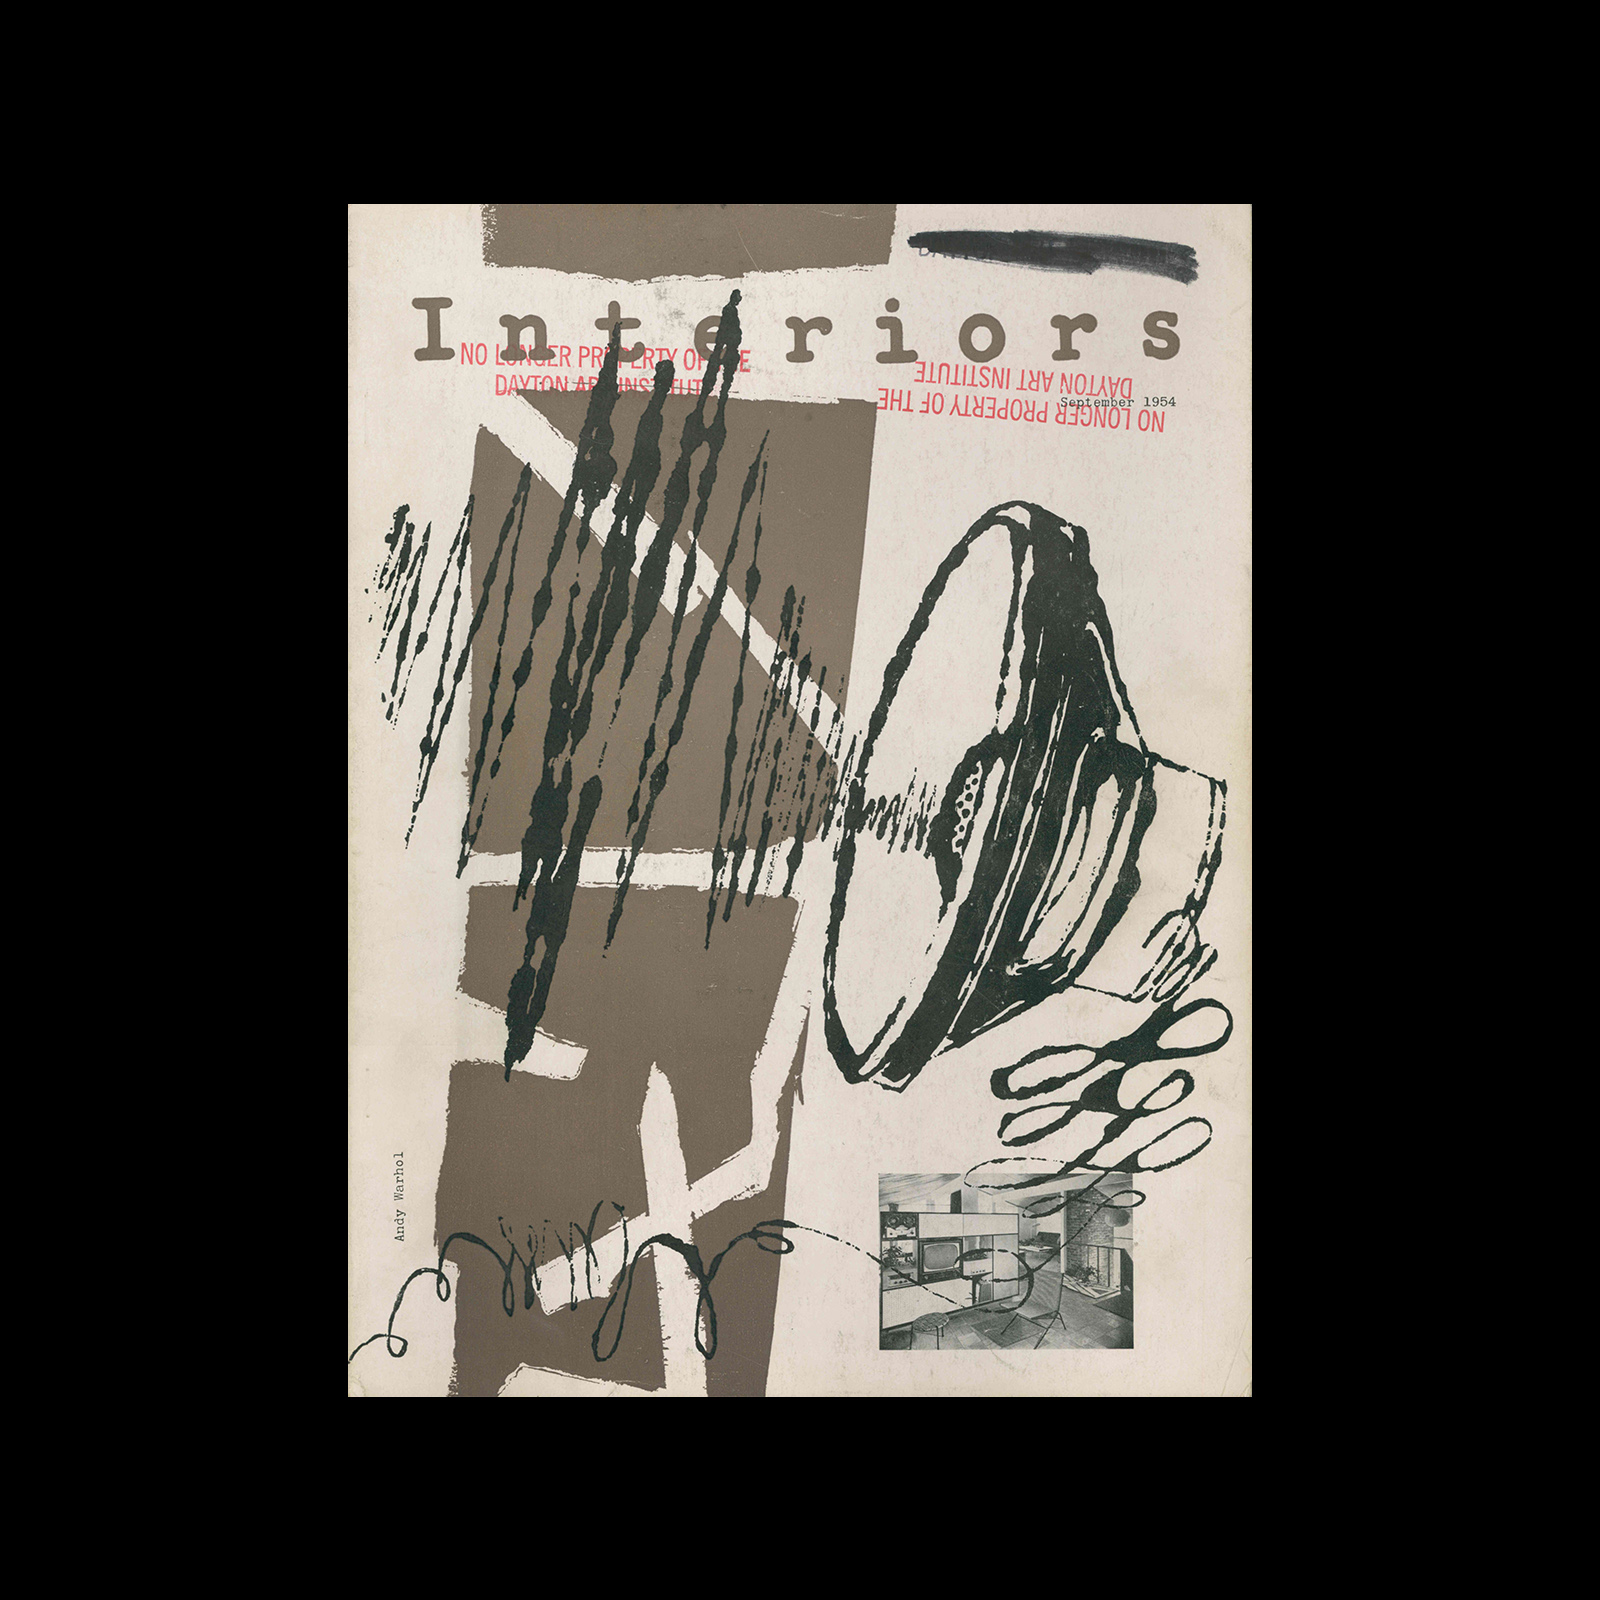 Interiors, September 1954. Cover design by Andy Warhol